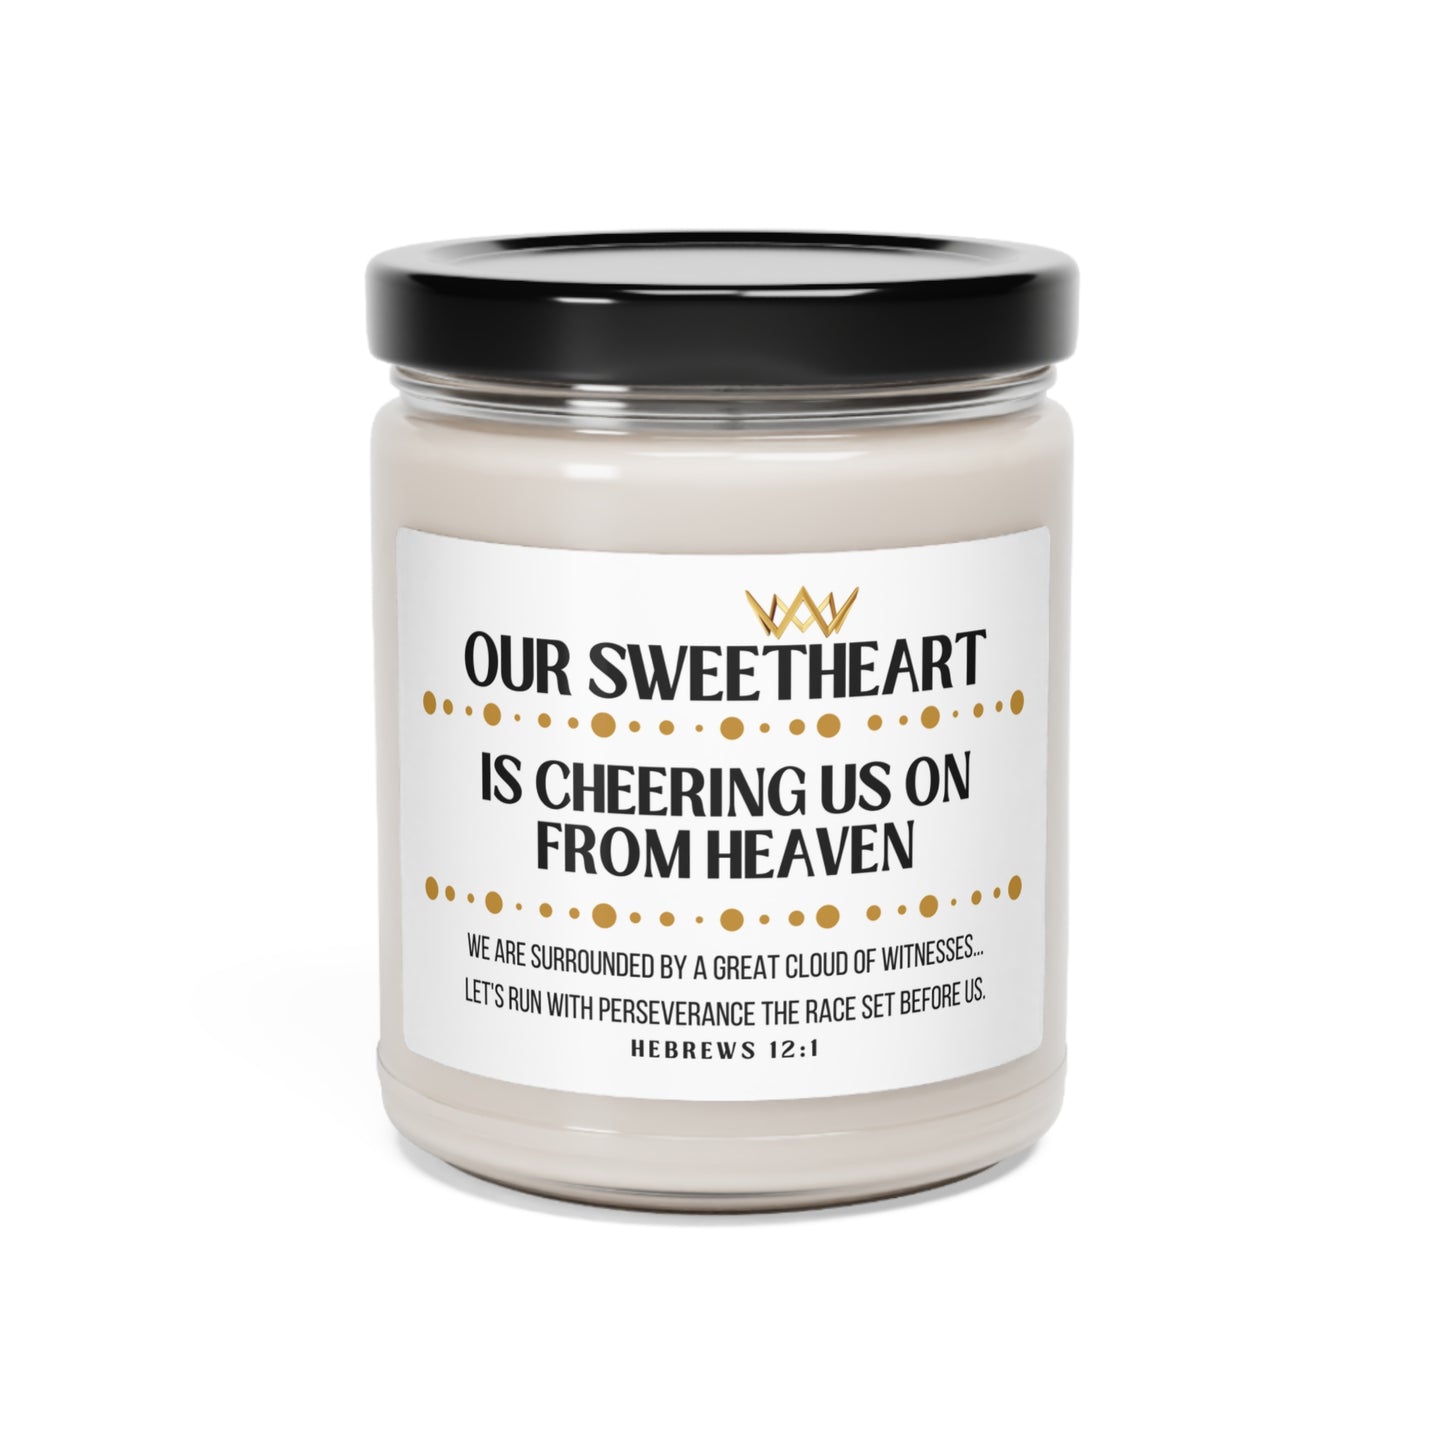 Sweetheart Memorial Scented Soy Candle, Cheering Us On From Heaven